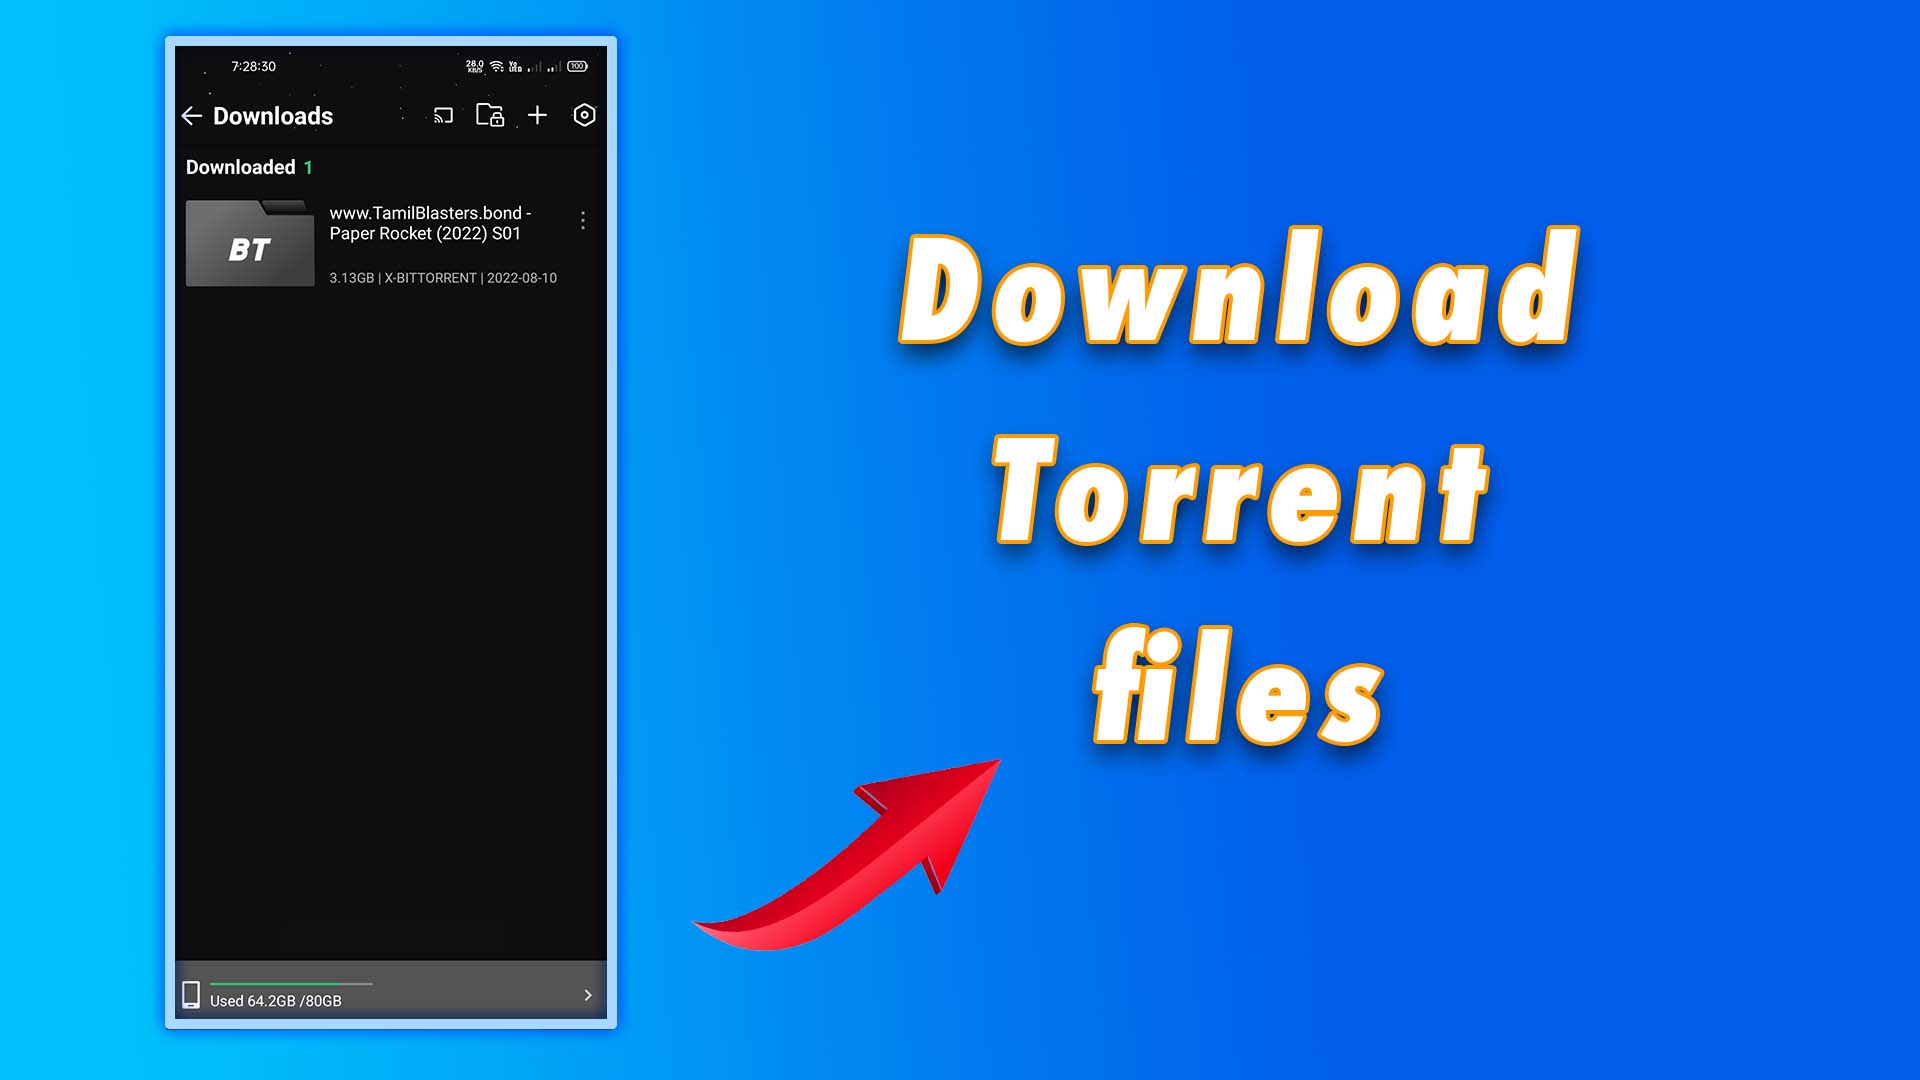 download torrent file in playit app